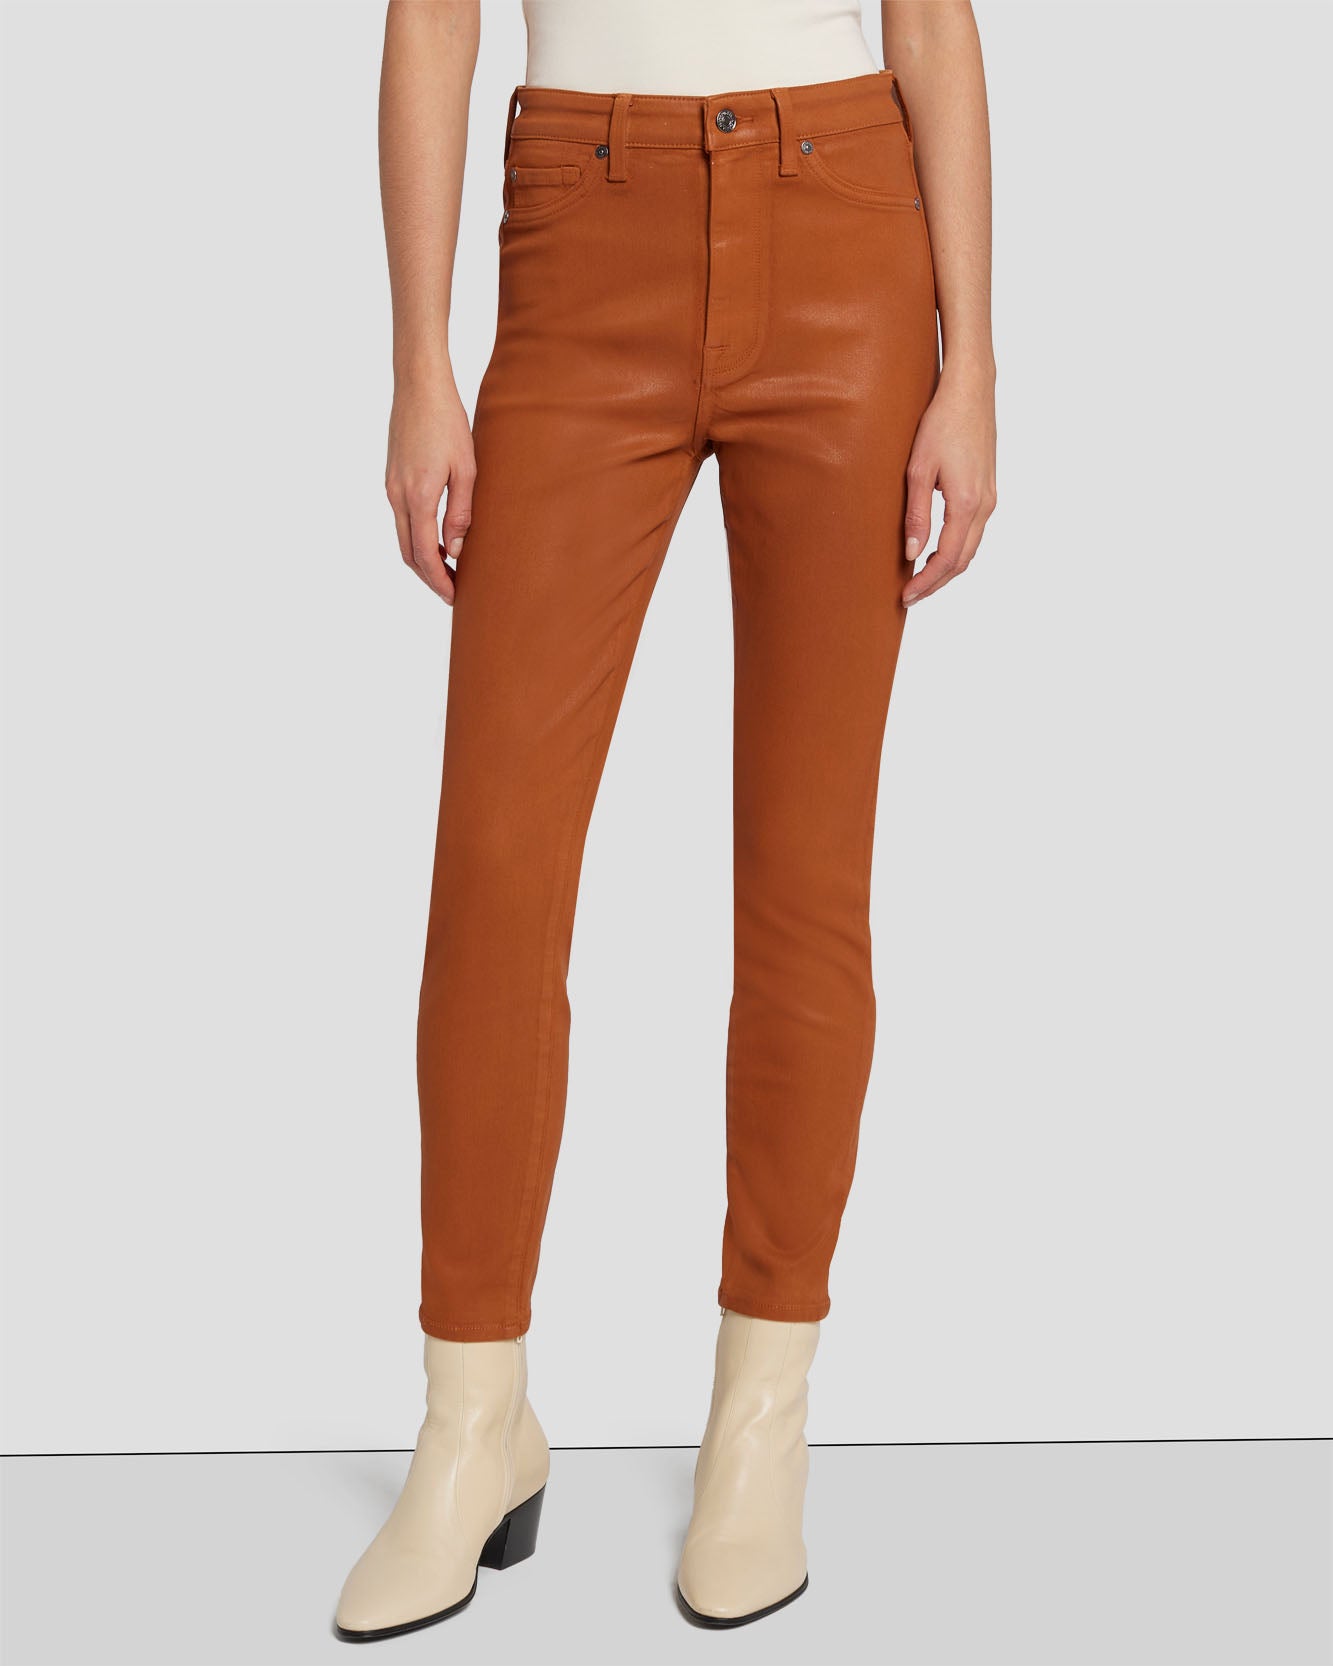 High Waist Ankle Skinny in Coated Ginger | 7 For All Mankind